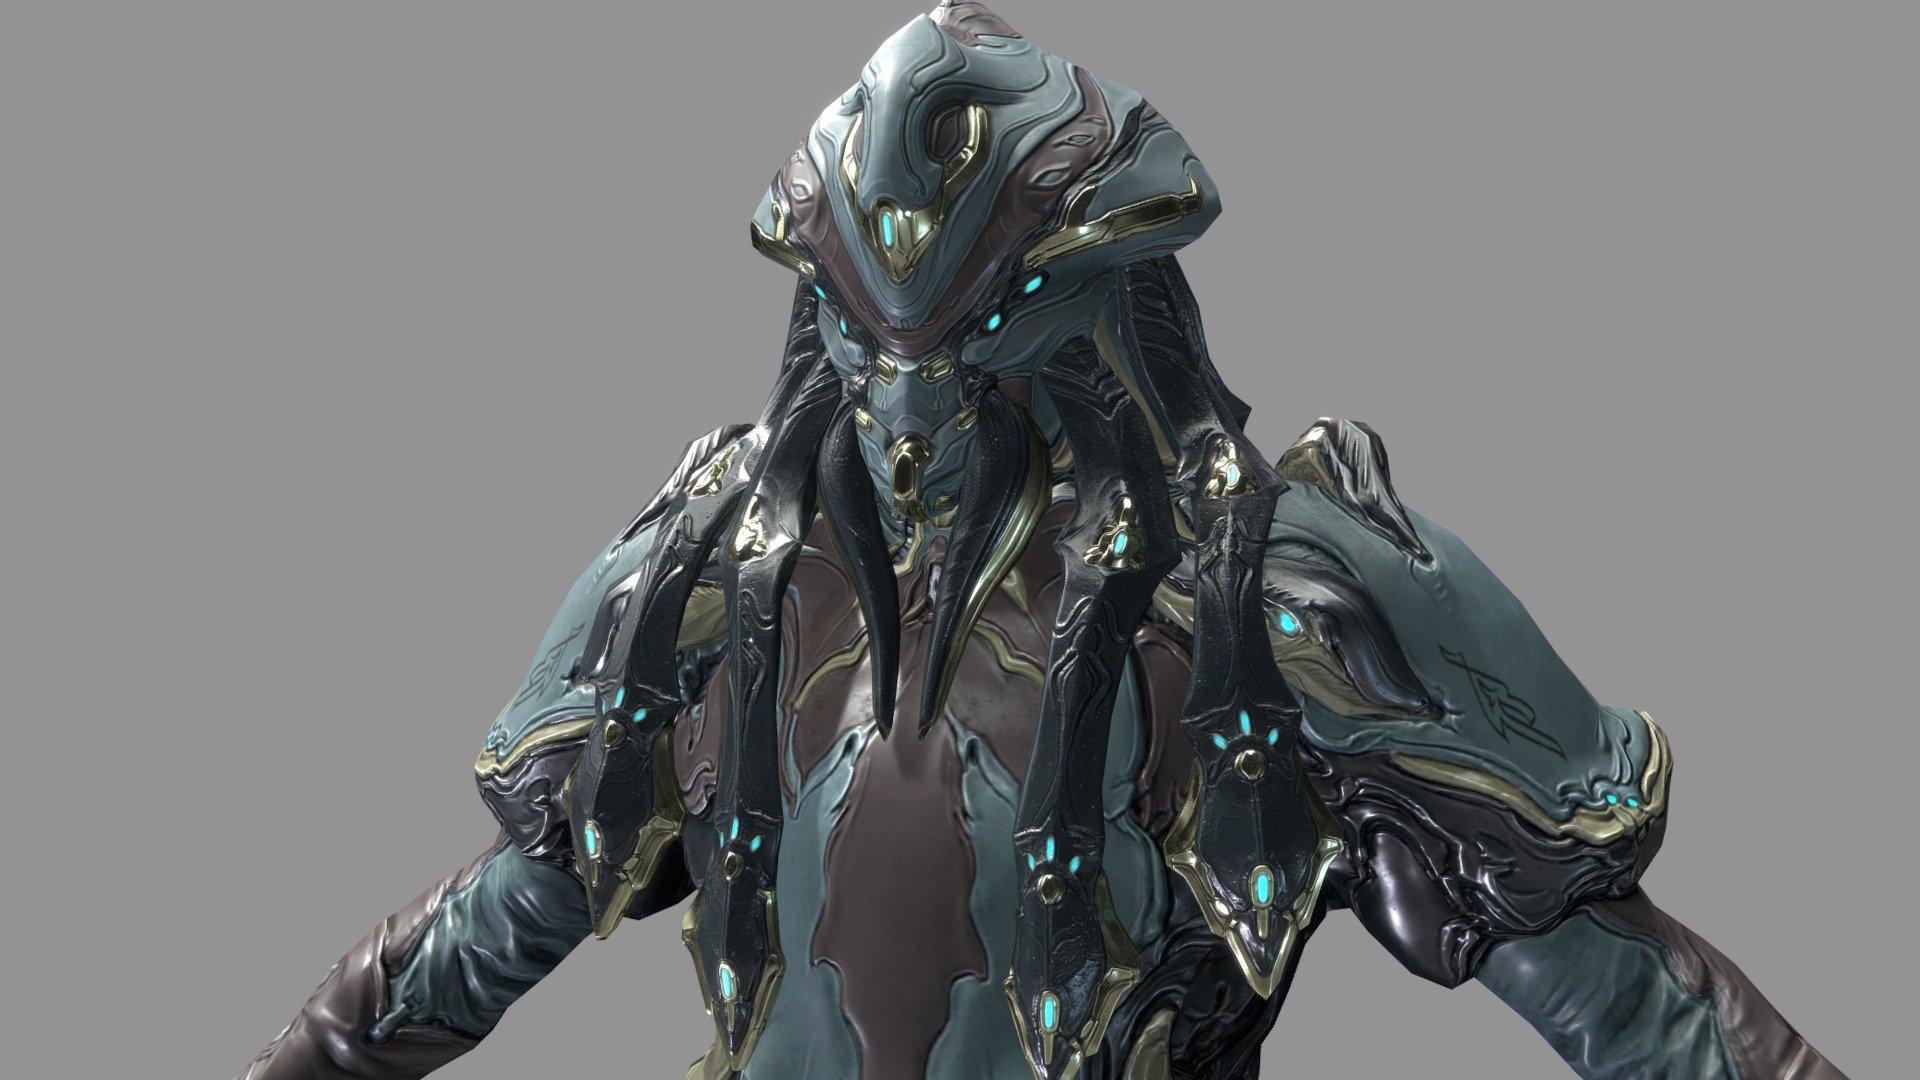 Collaborative Effort by me - (Crackle2012) &amp; Vulbjorn.

Karkinos Helmet - An alternate helmet that will be submitted to tennogen for the Hydroid character within the game Warframe.

Only the Helmet is our creation!  &ndash; The Original Character - Hydroid, the Body basemesh, and the Body Textures belong to Digital Extremes 3d model